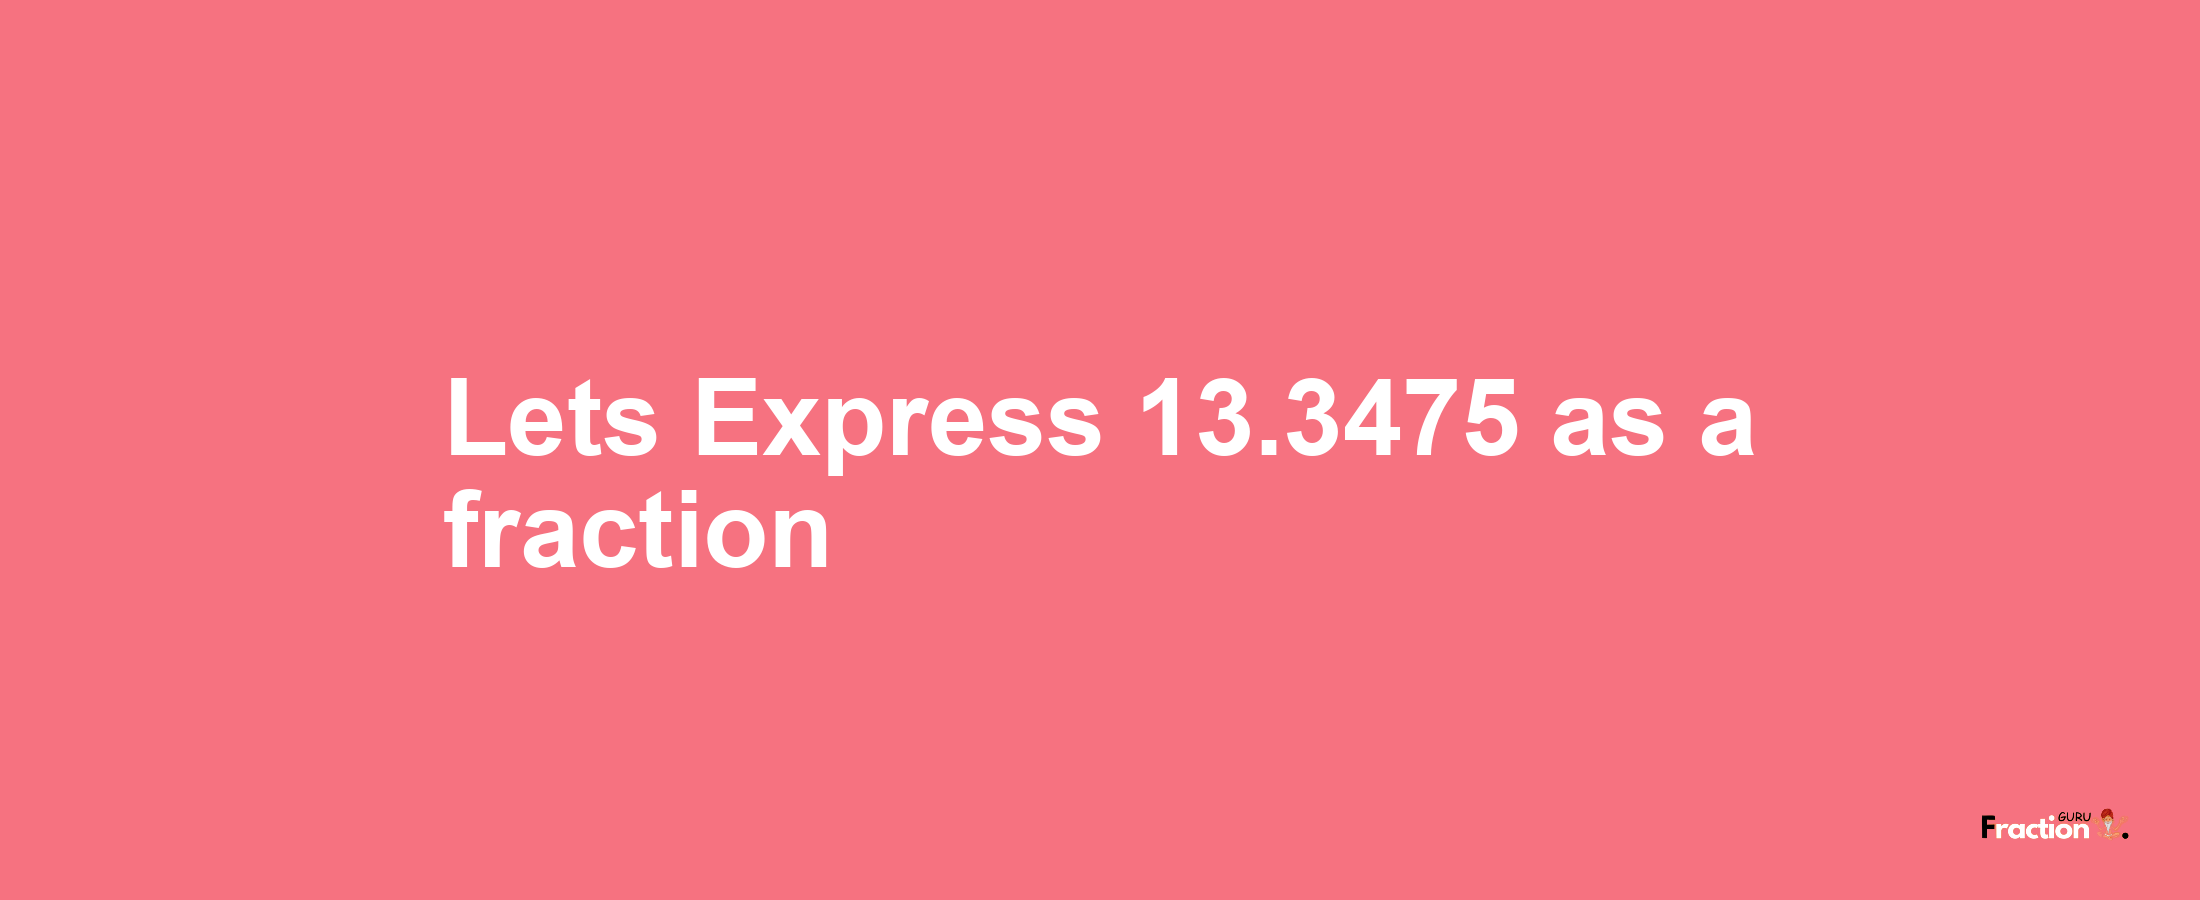 Lets Express 13.3475 as afraction